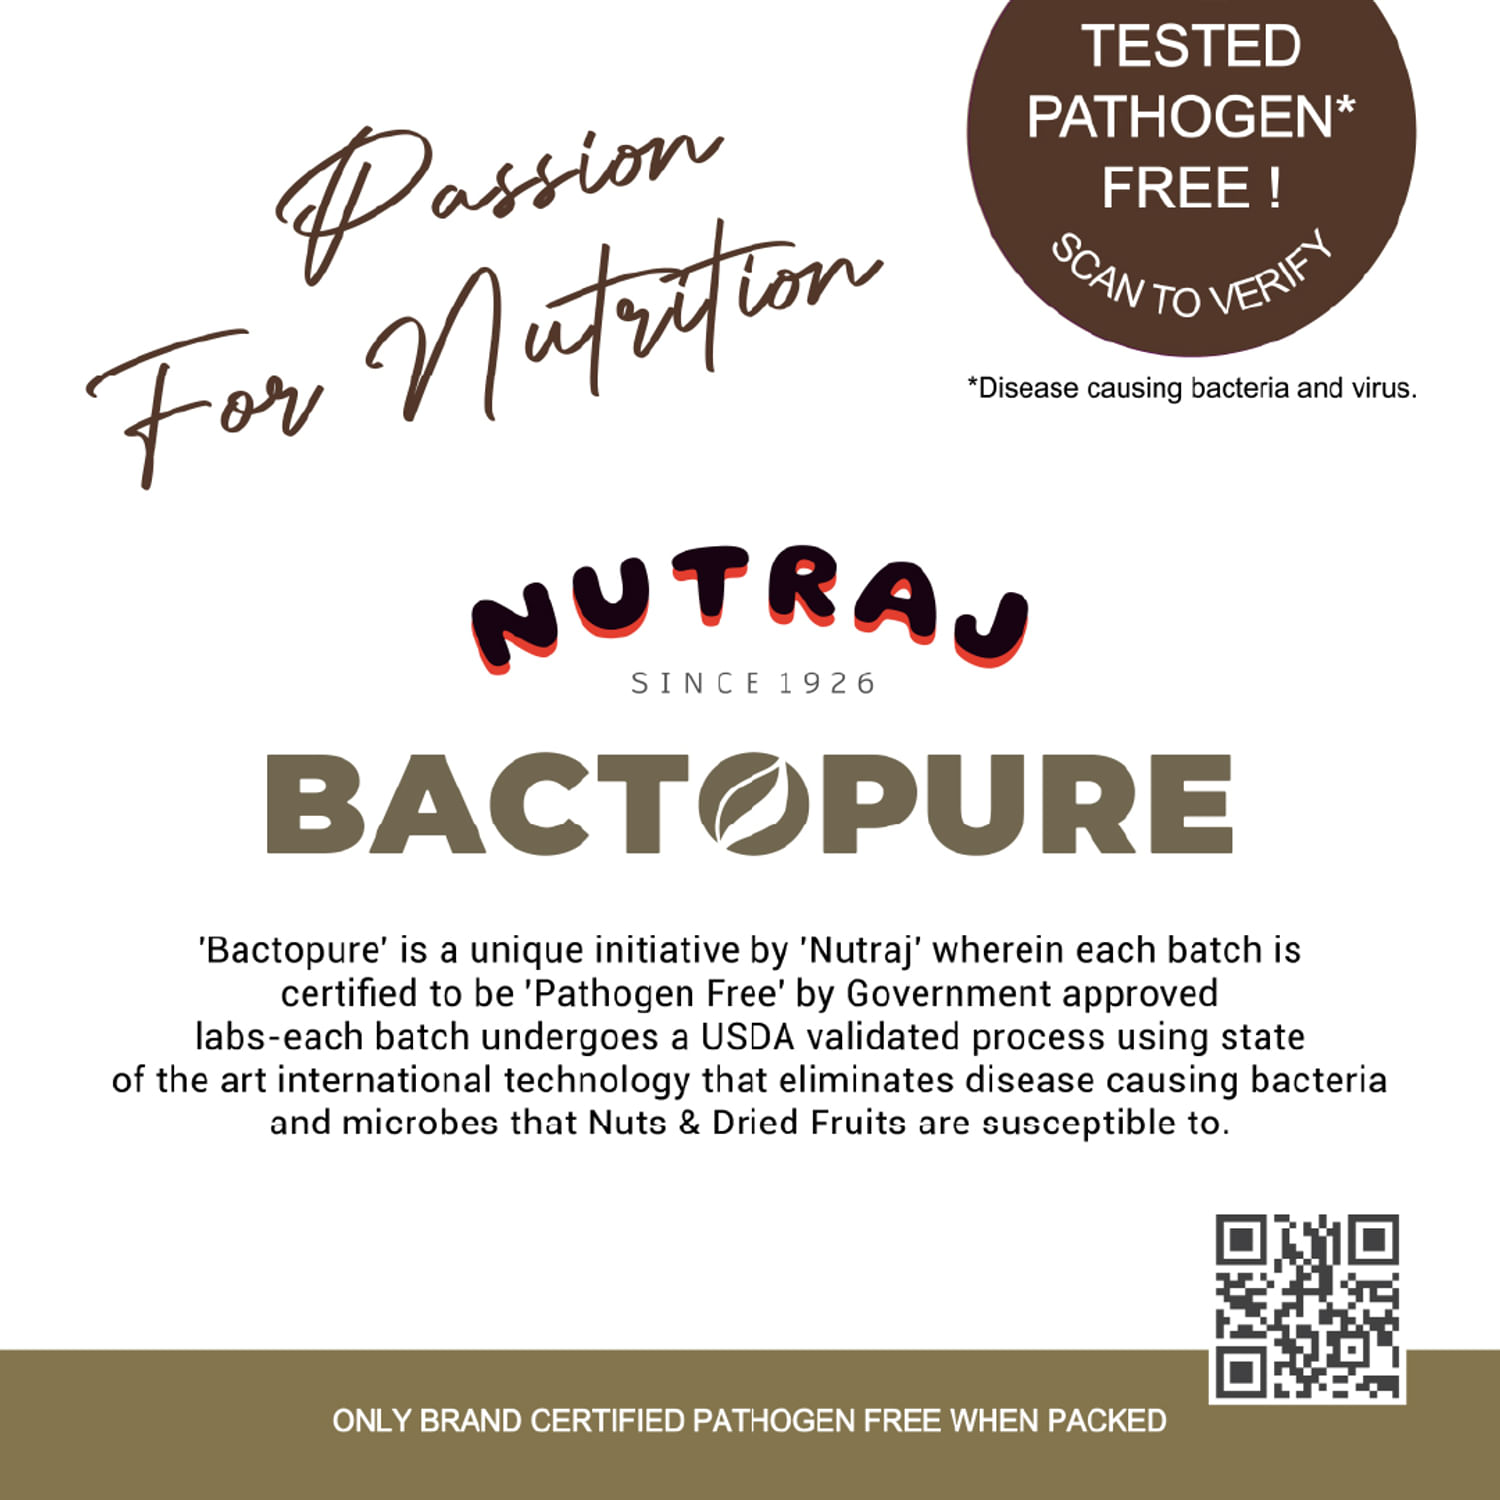 Bactopure Chironji 100 gm - Pack of 2